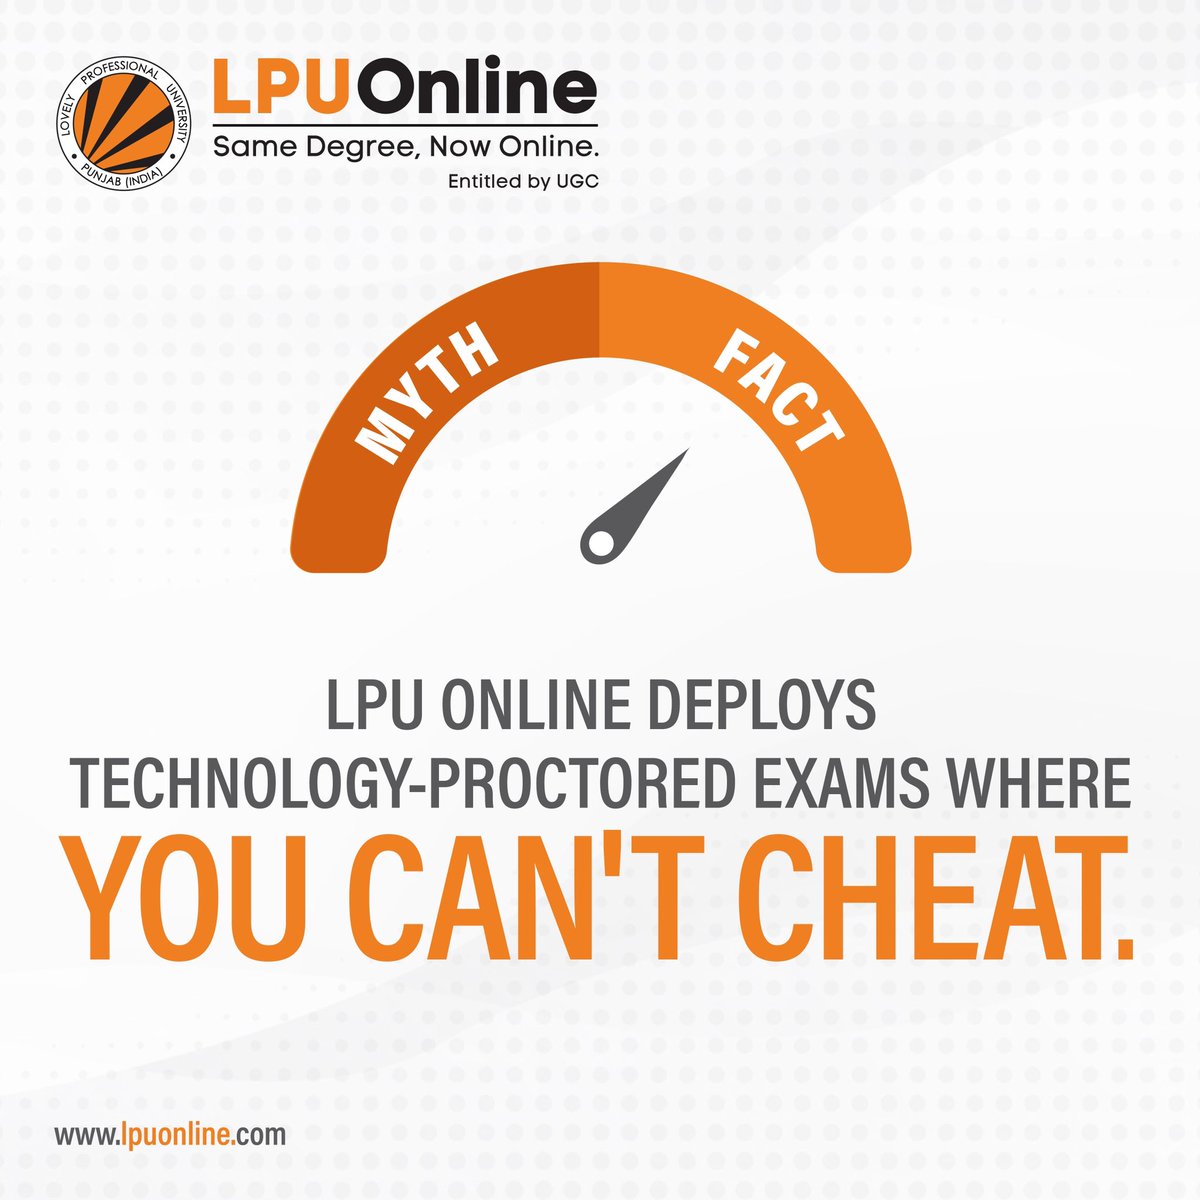 To enhance your potential, we limit the chances of malpractices by using technology.

#Exams #ProctoredExams
#MythBusters #Cheating
#Myths #Technology
#OnlineExam #LPUOnline